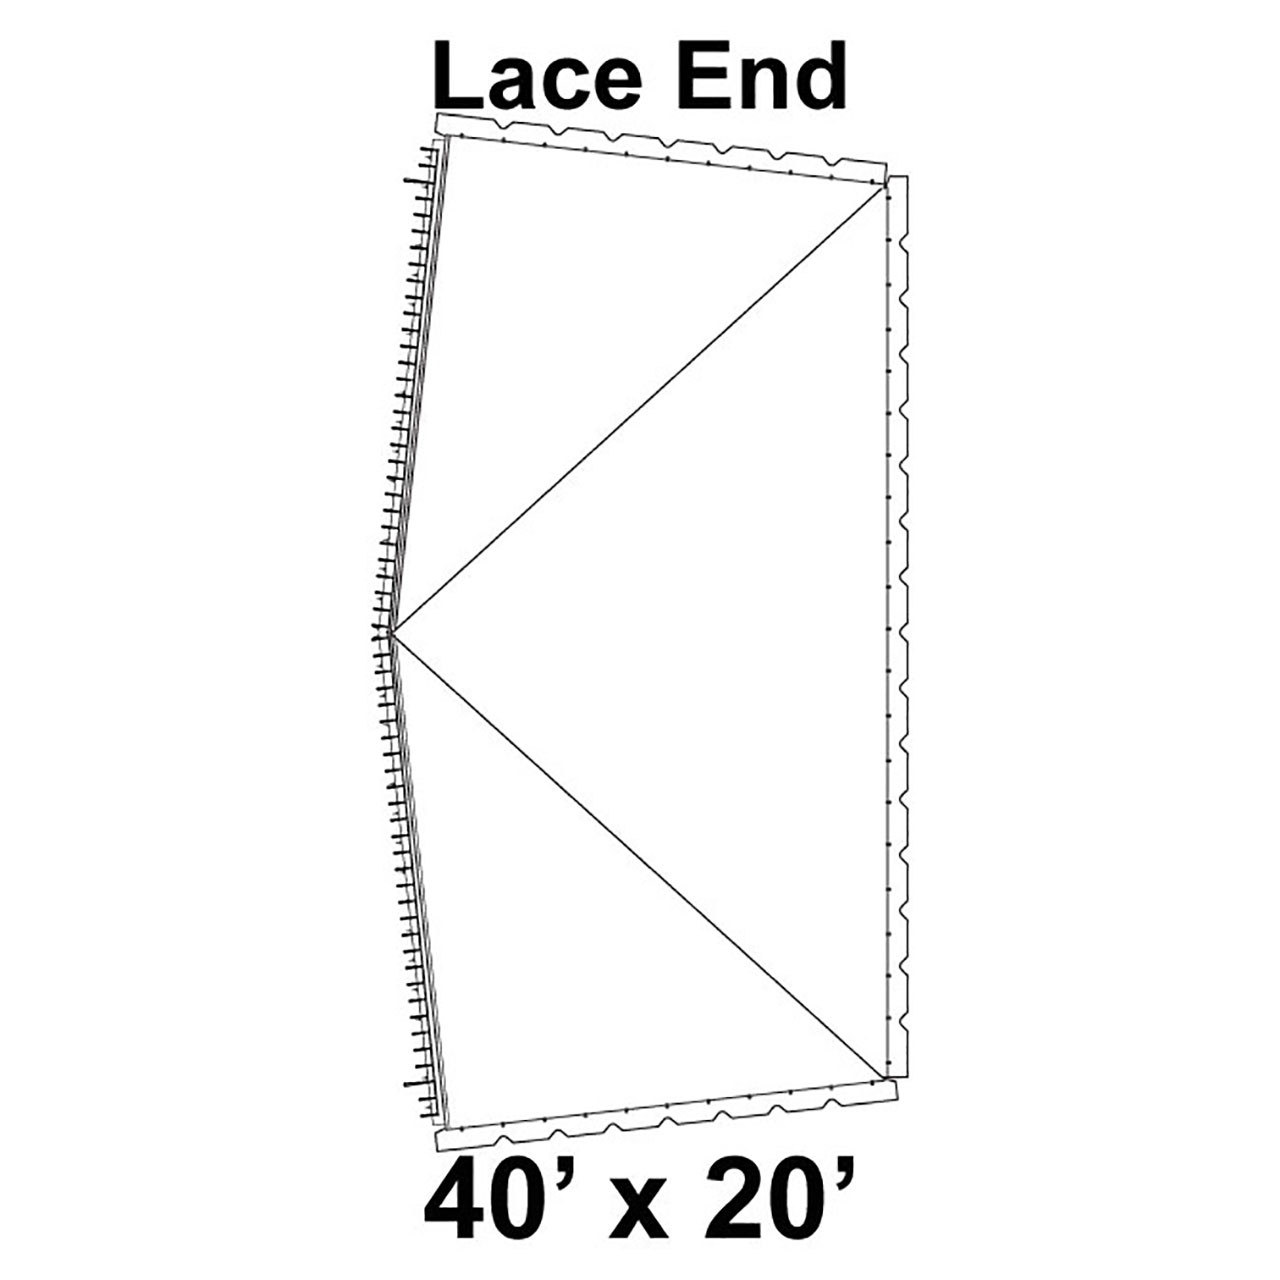 40' x 20' Classic Frame Tent Lace End, 16 oz. Ratchet Top, Solid White